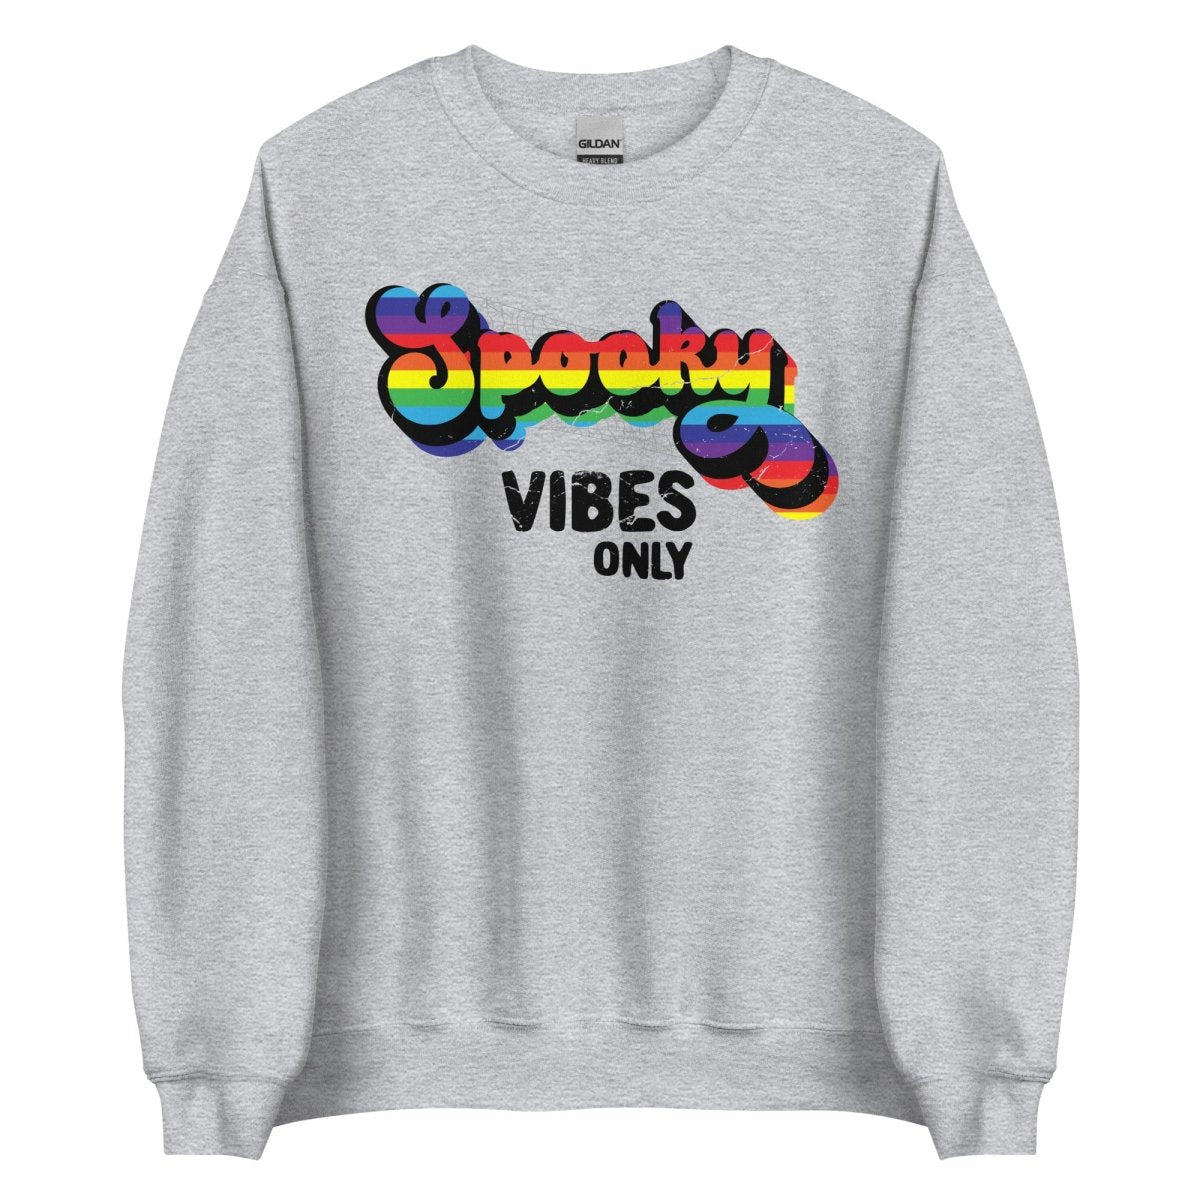 Rainbow Spooky Vibes Only Sweatshirt - On Trend Shirts